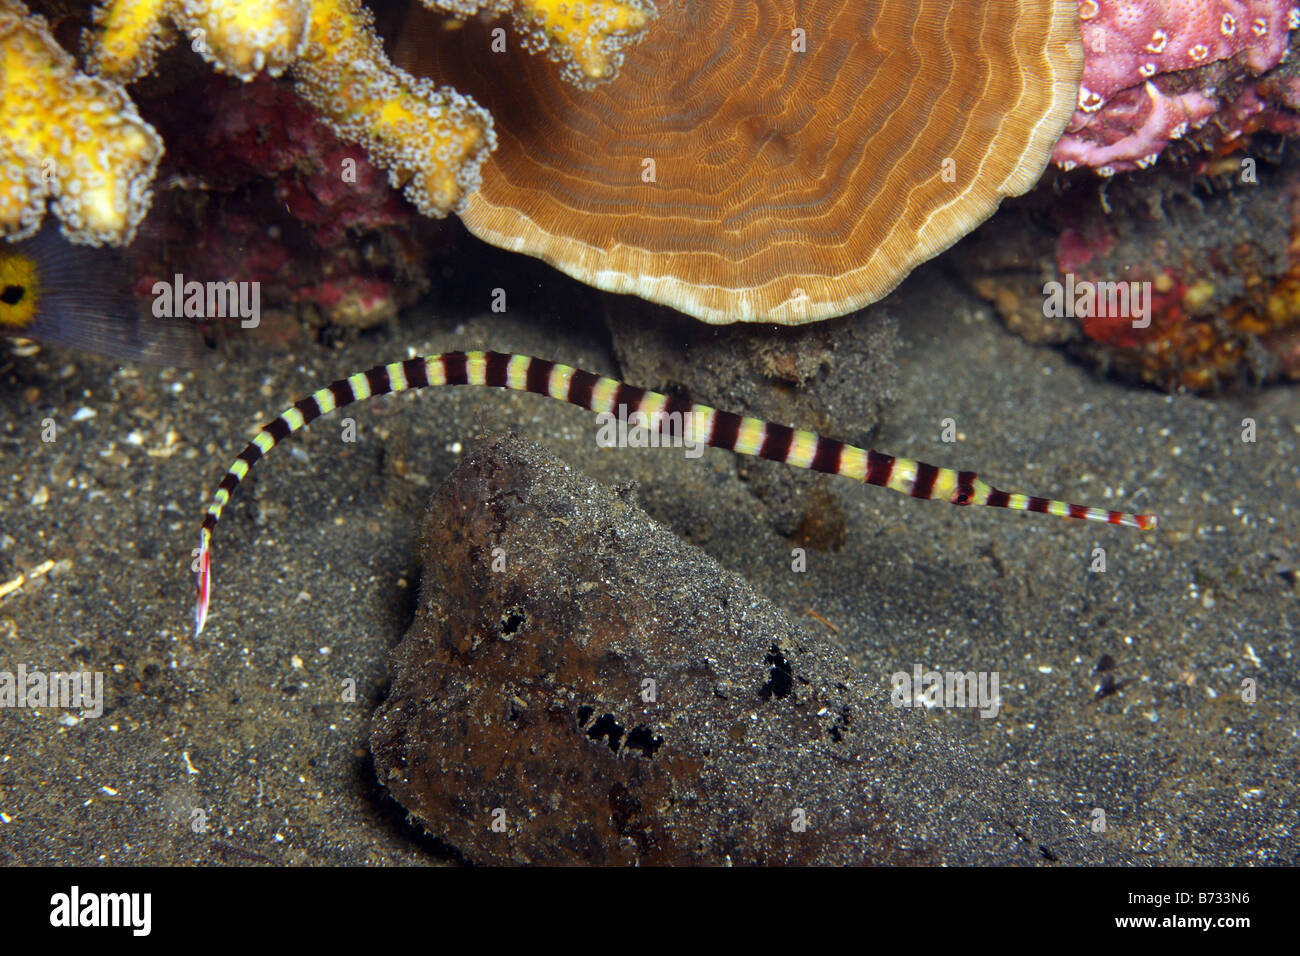 Ringed pipefish Doryrhamphus dactyliophorus swimming on coral reef with other fish Stock Photo